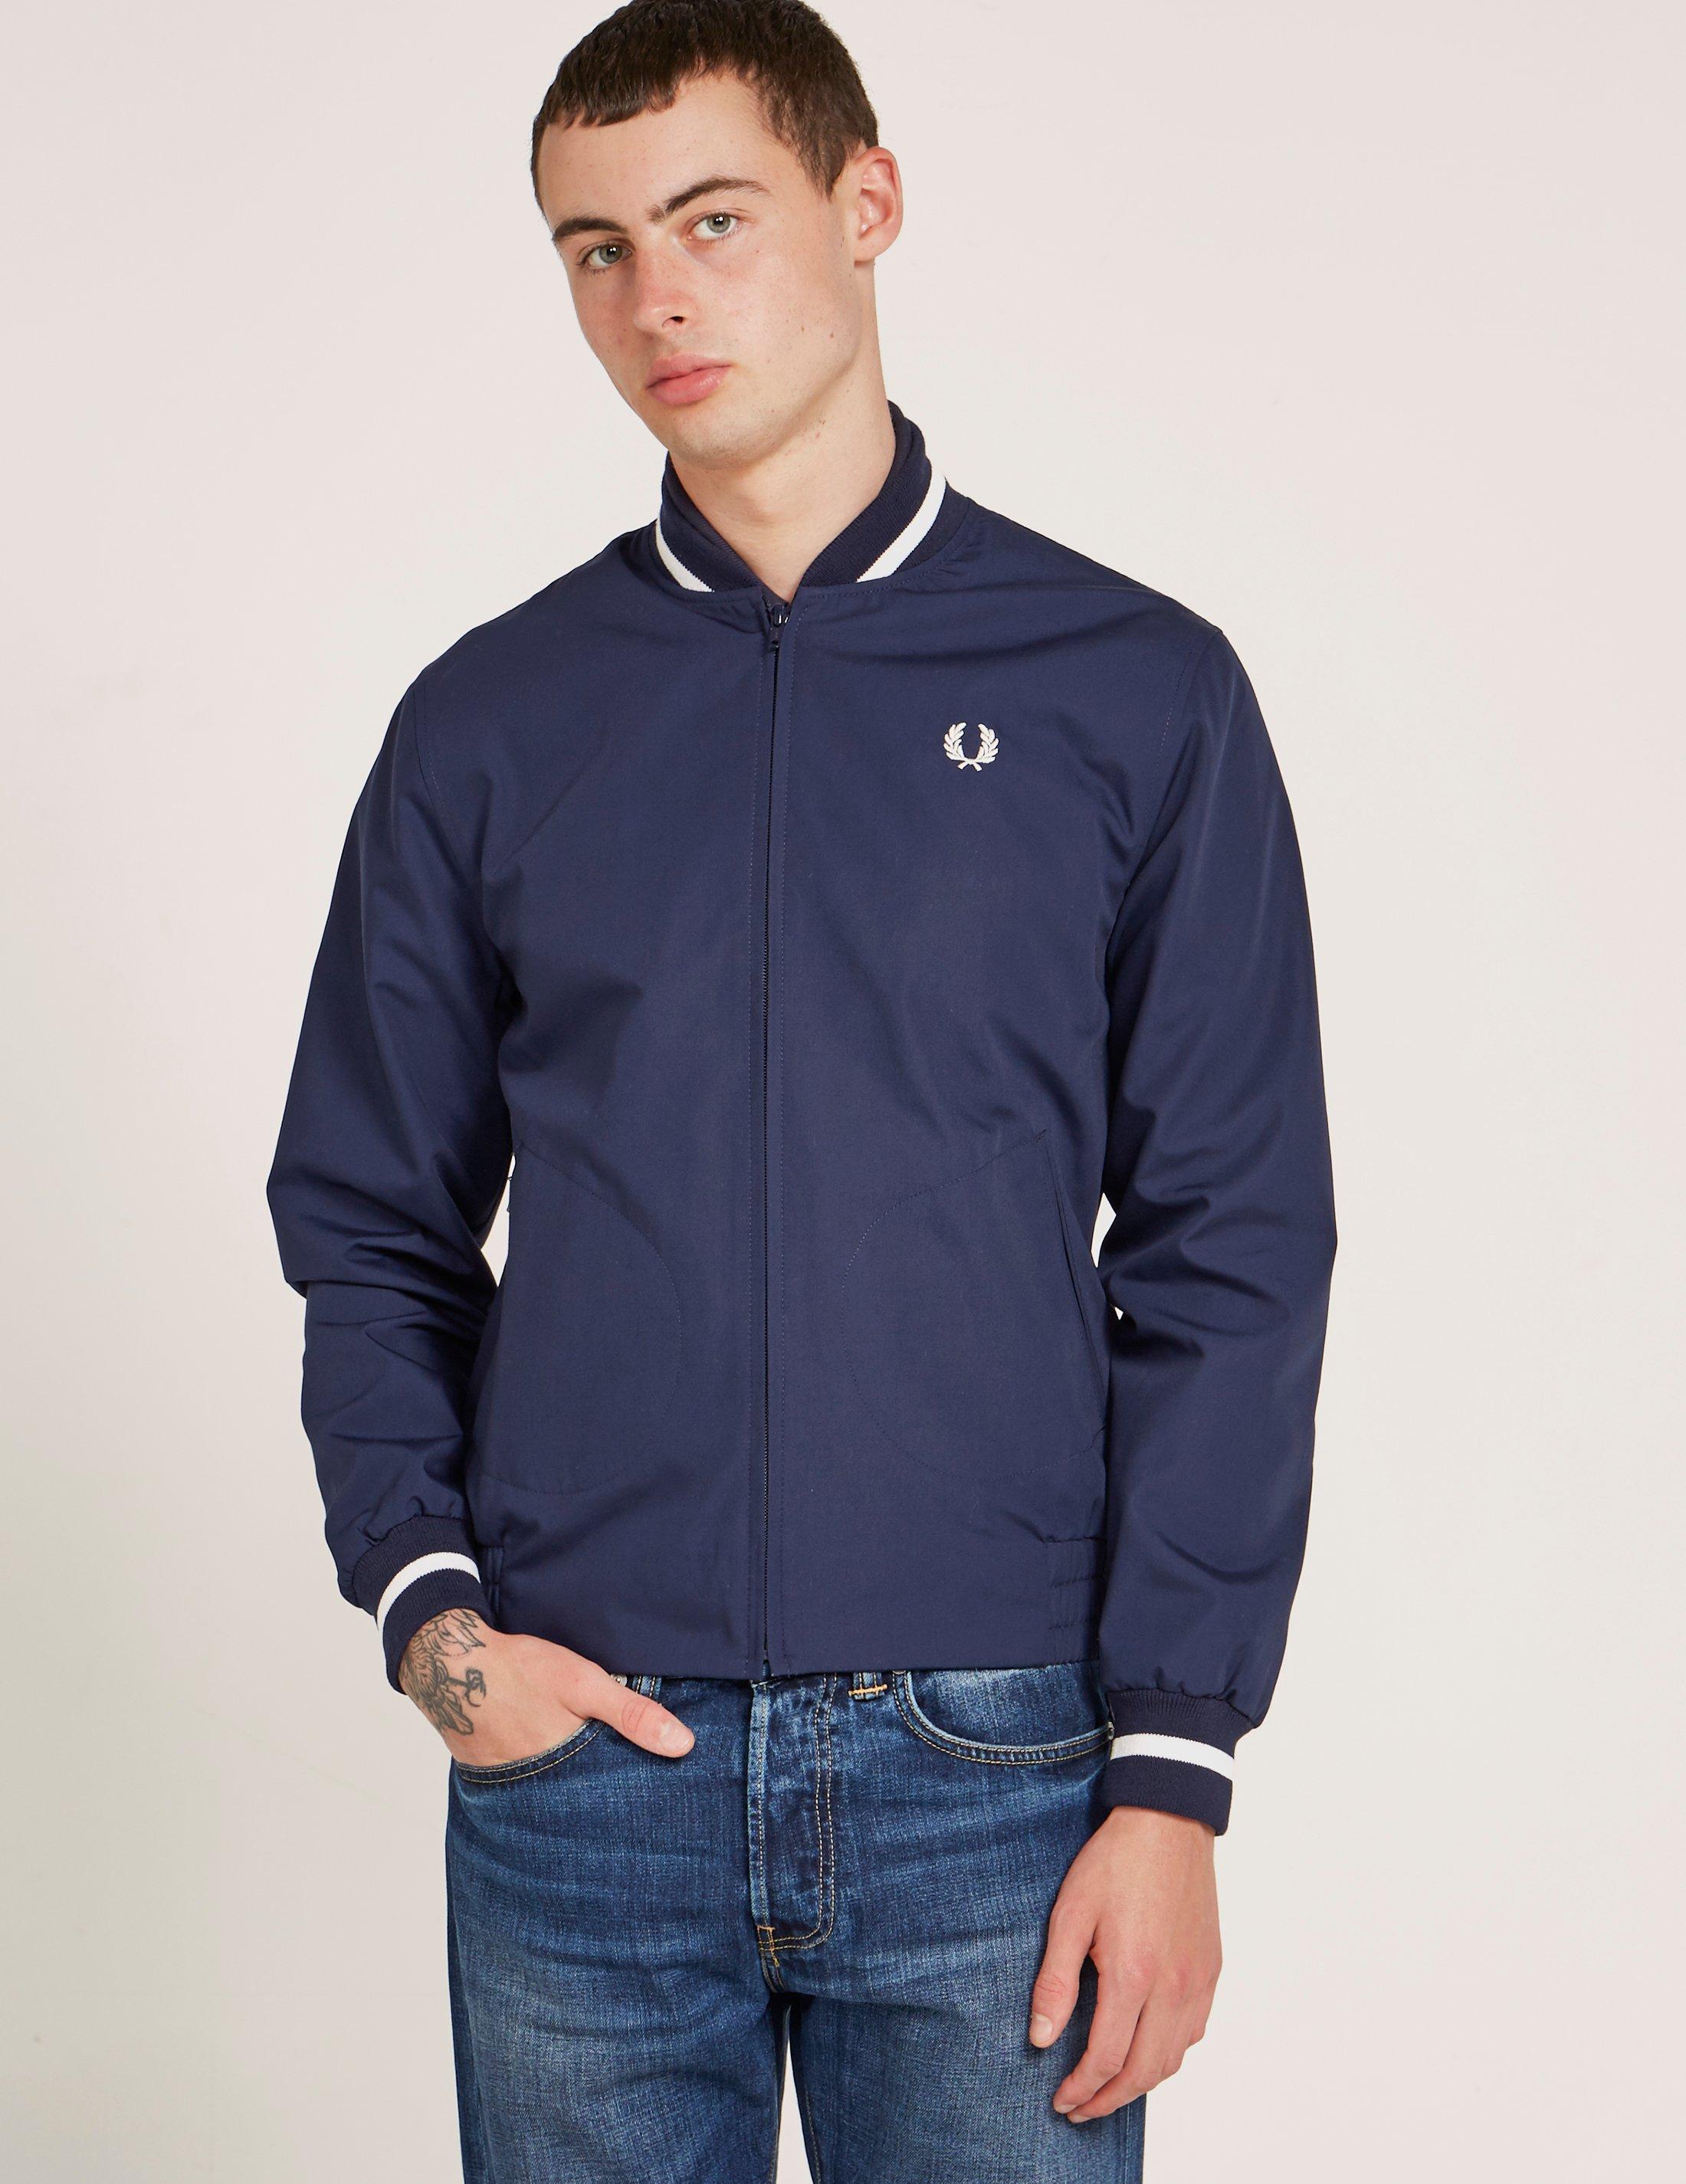 Fred Perry - Enjoy free delivery and returns in the uk.